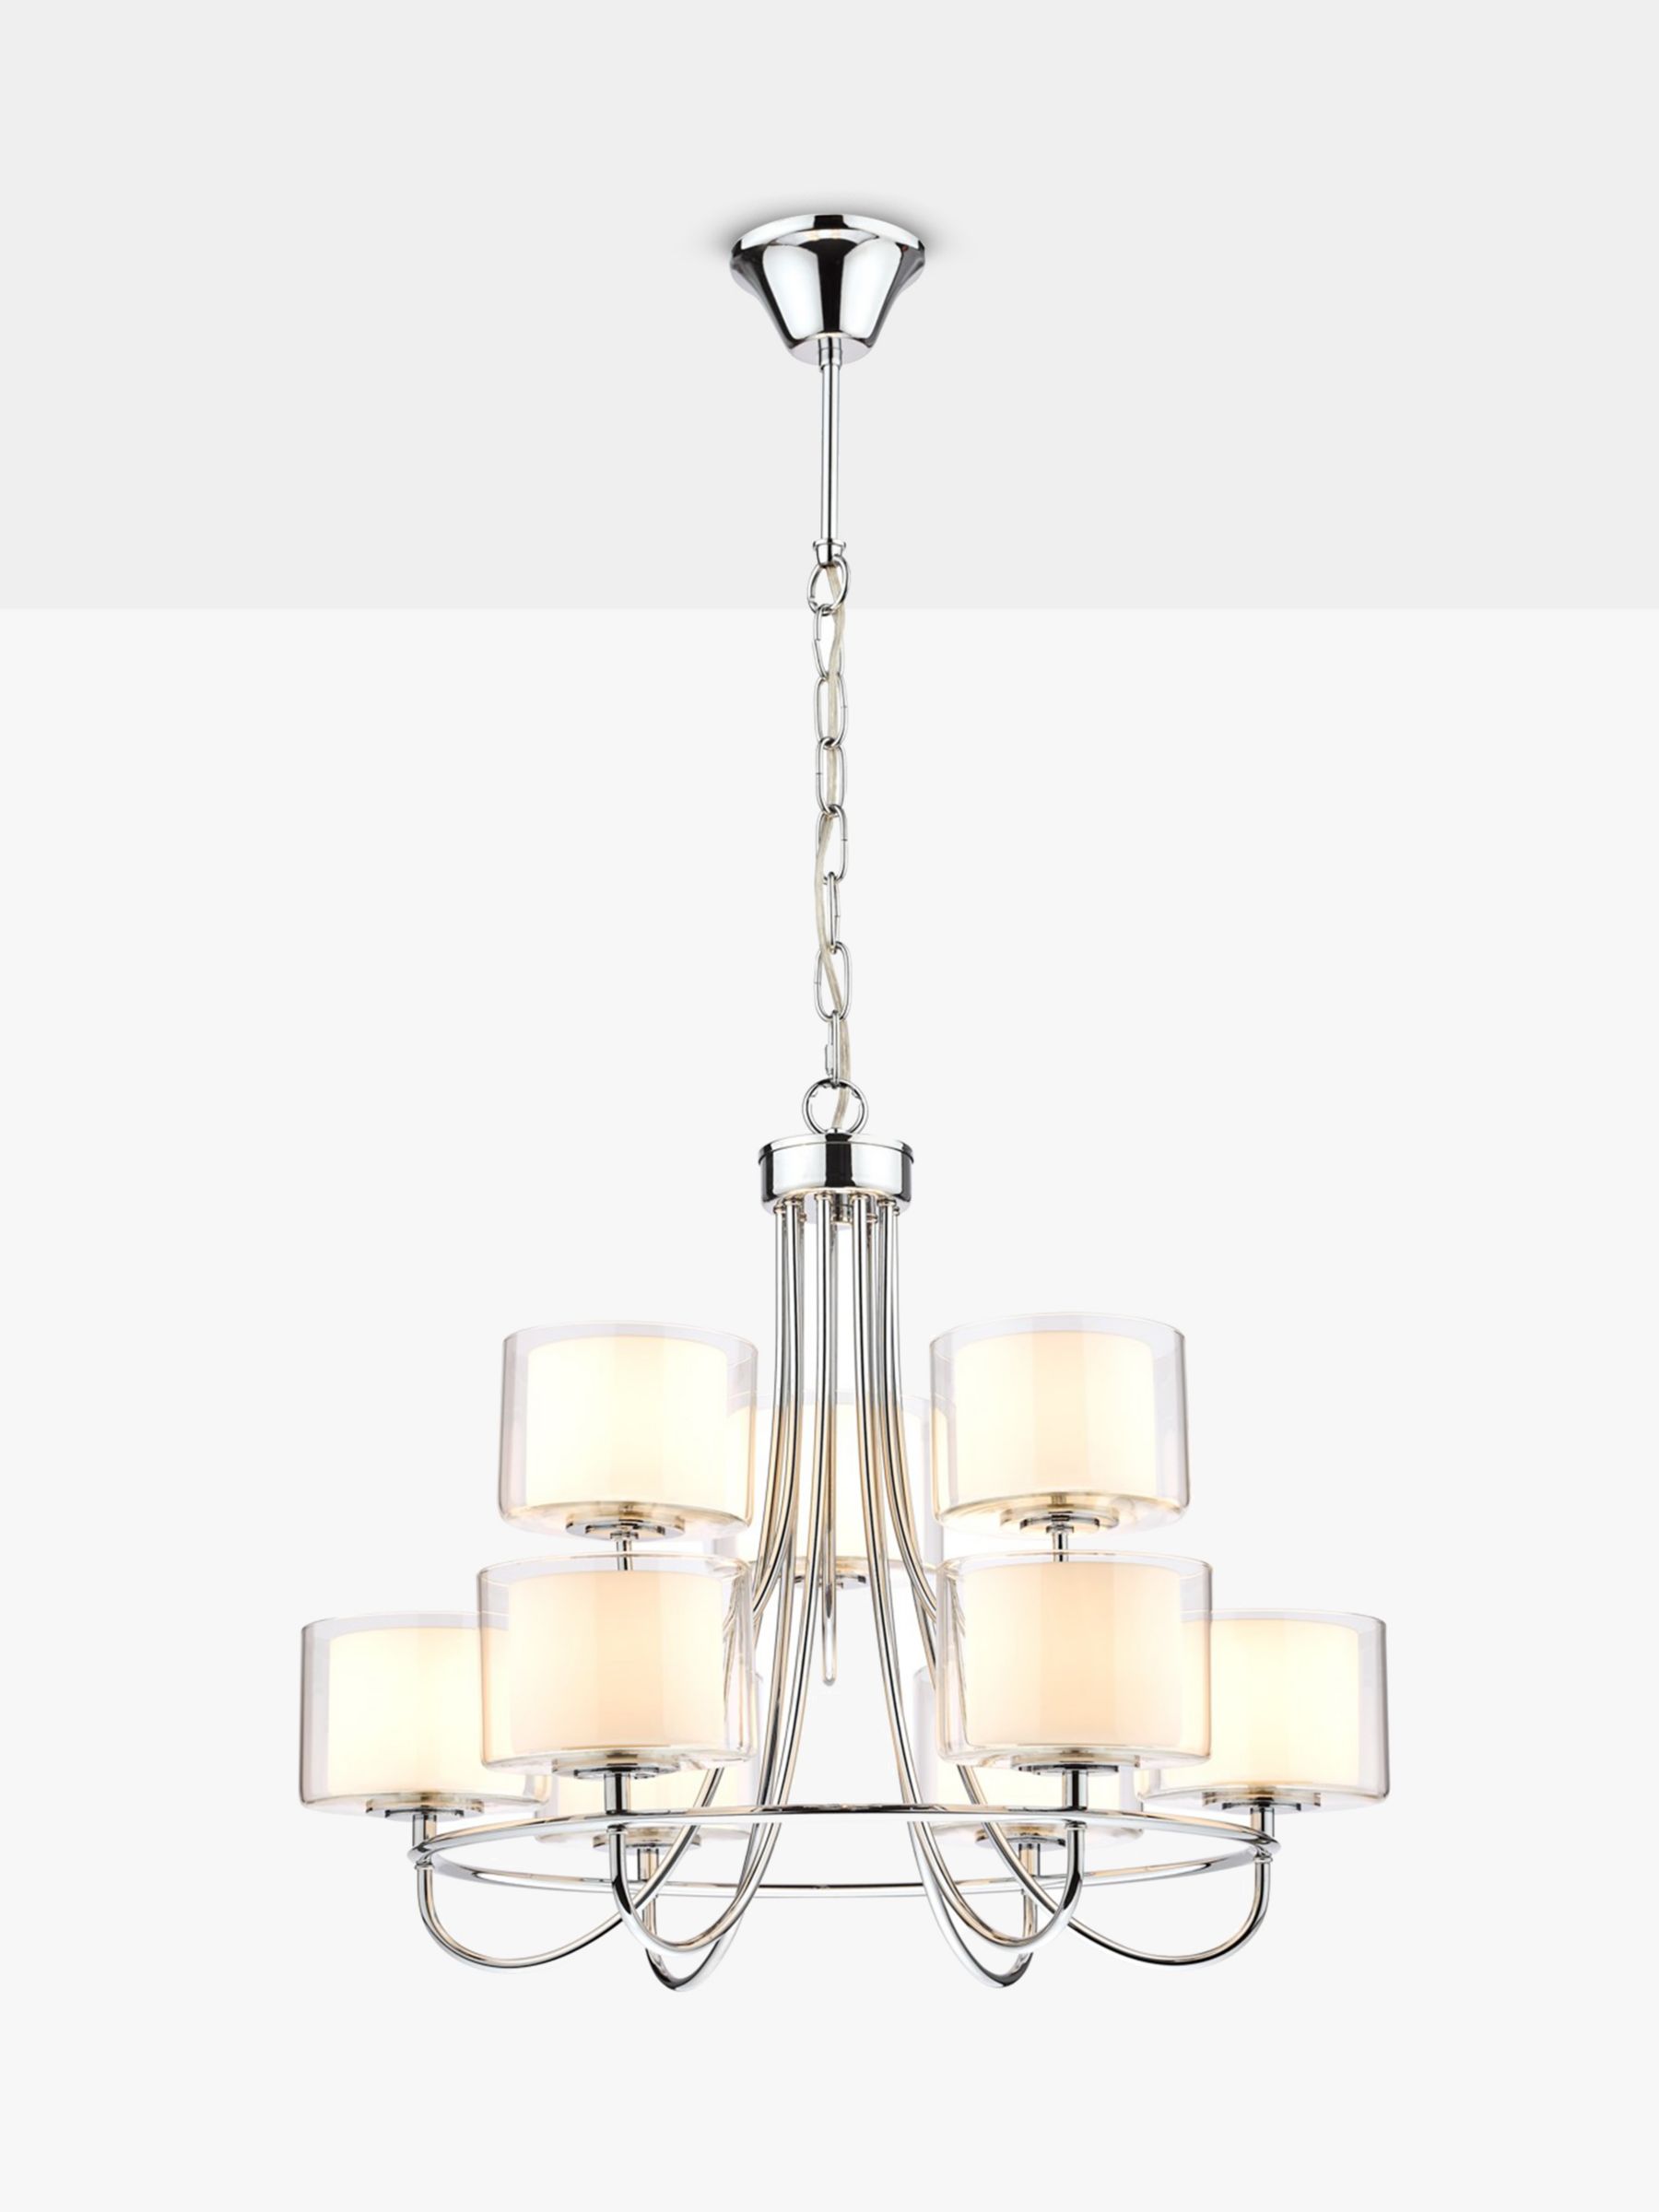 Photo of Laura ashley southwell 9 arm chandelier ceiling light polished nickel